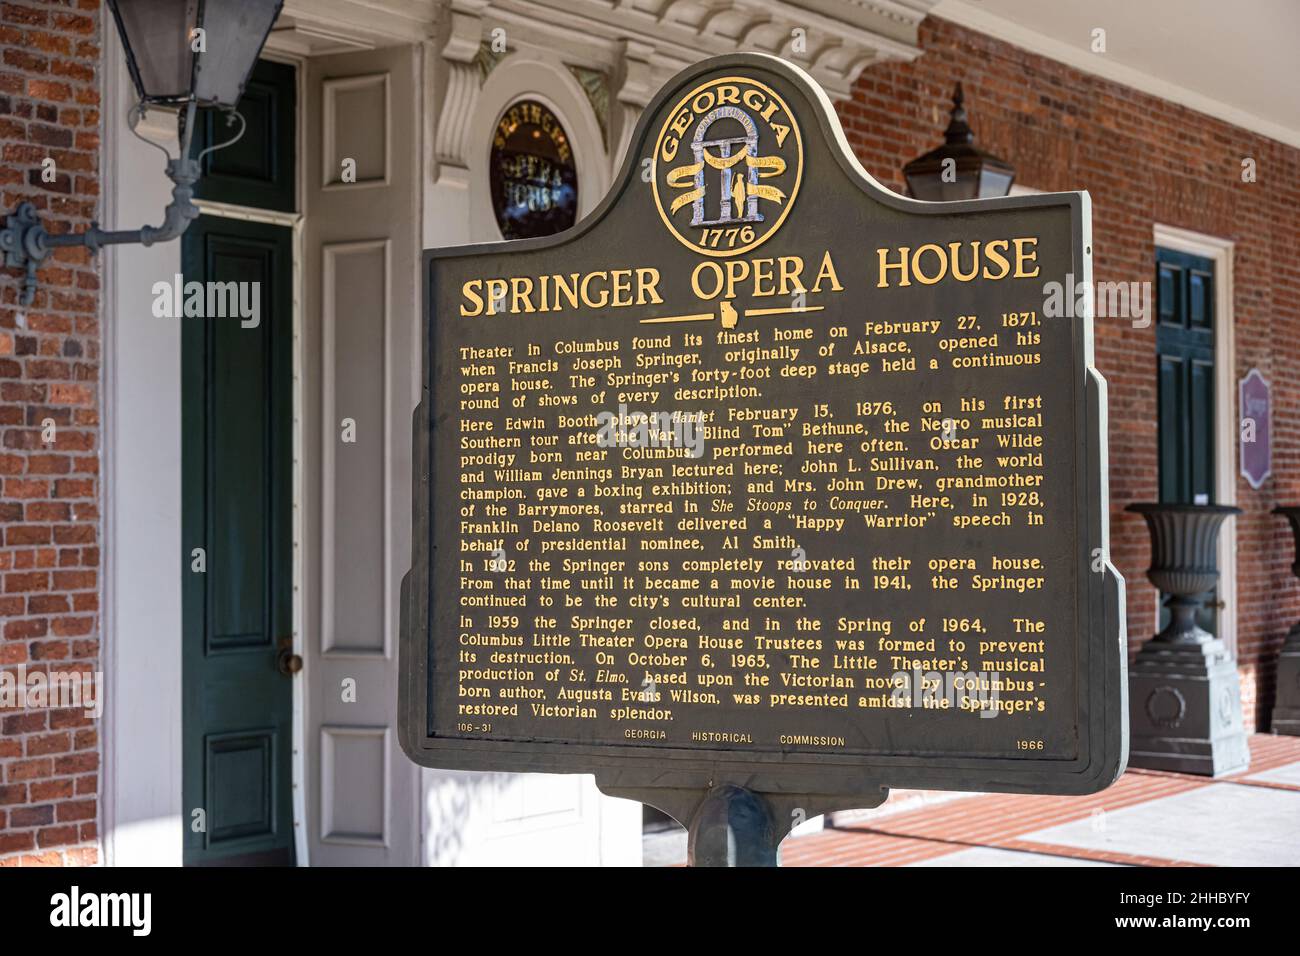 Georgia historical marker for the Springer Opera House which opened February 27, 1871, and is still in use today in Uptown Columbus, Georgia. (USA) Stock Photo